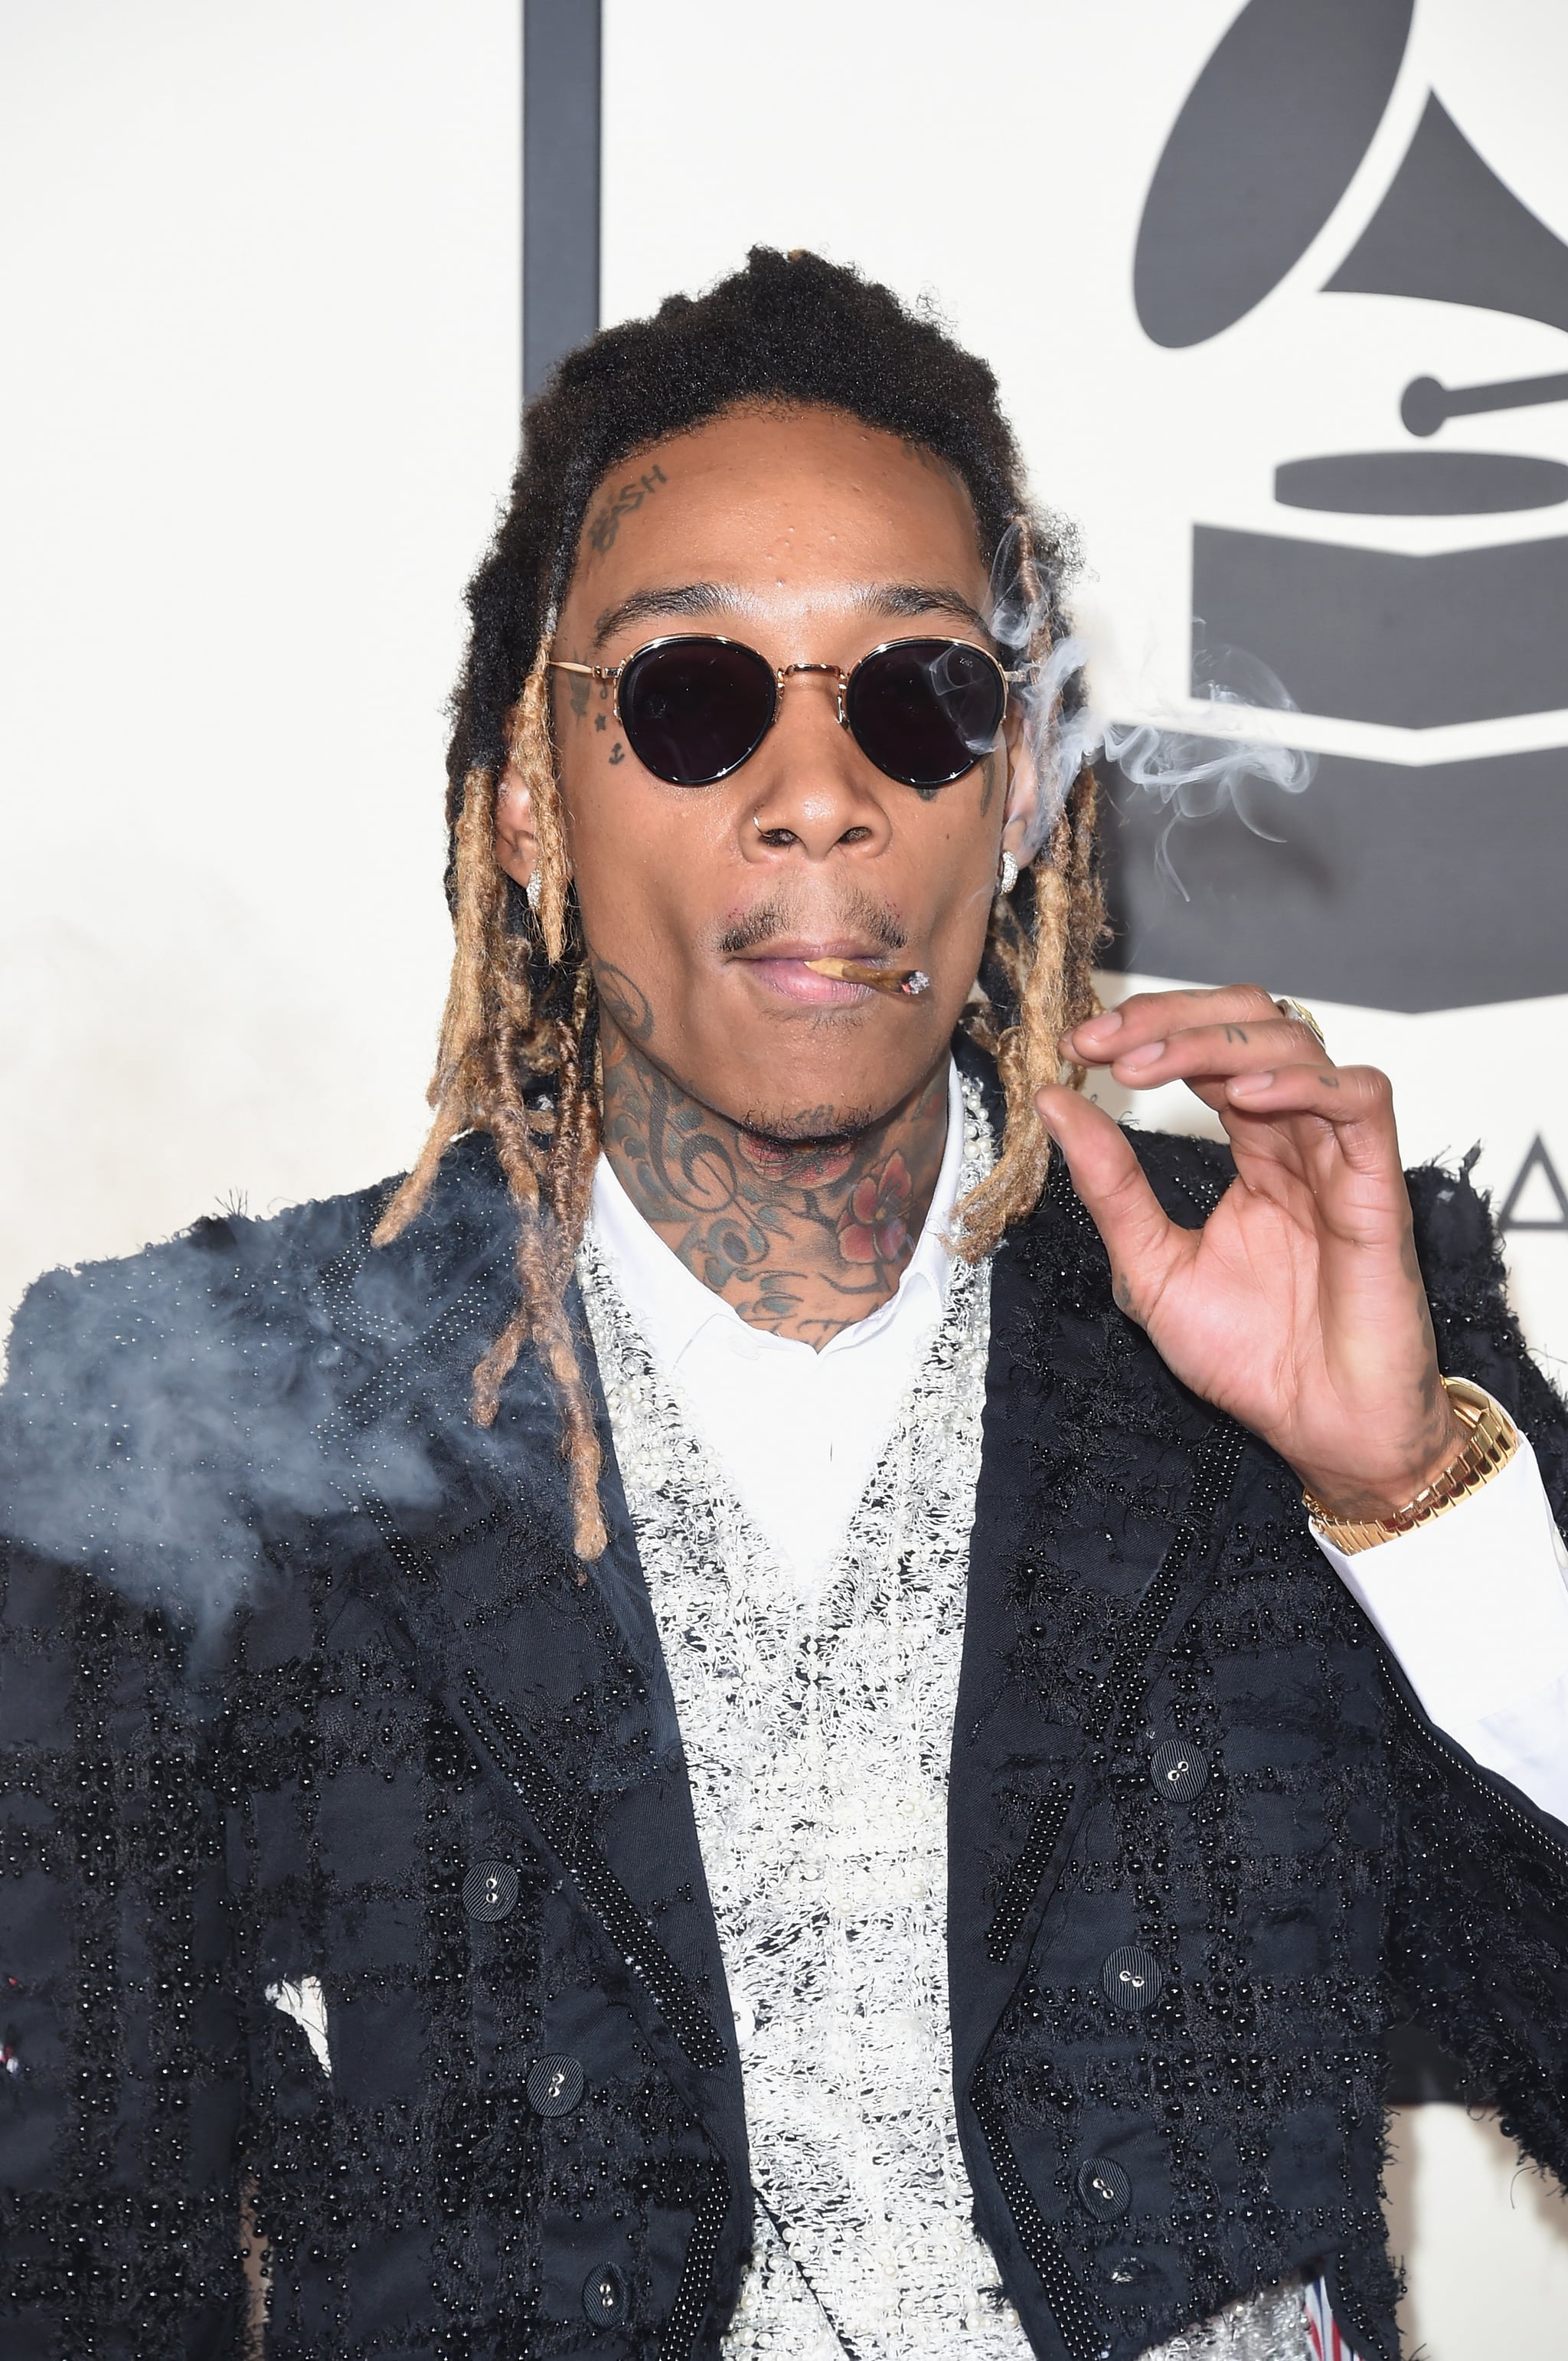 Pictured Wiz Khalifa 39 Grammys Moments You May Have Missed Popsugar Celebrity Photo 36